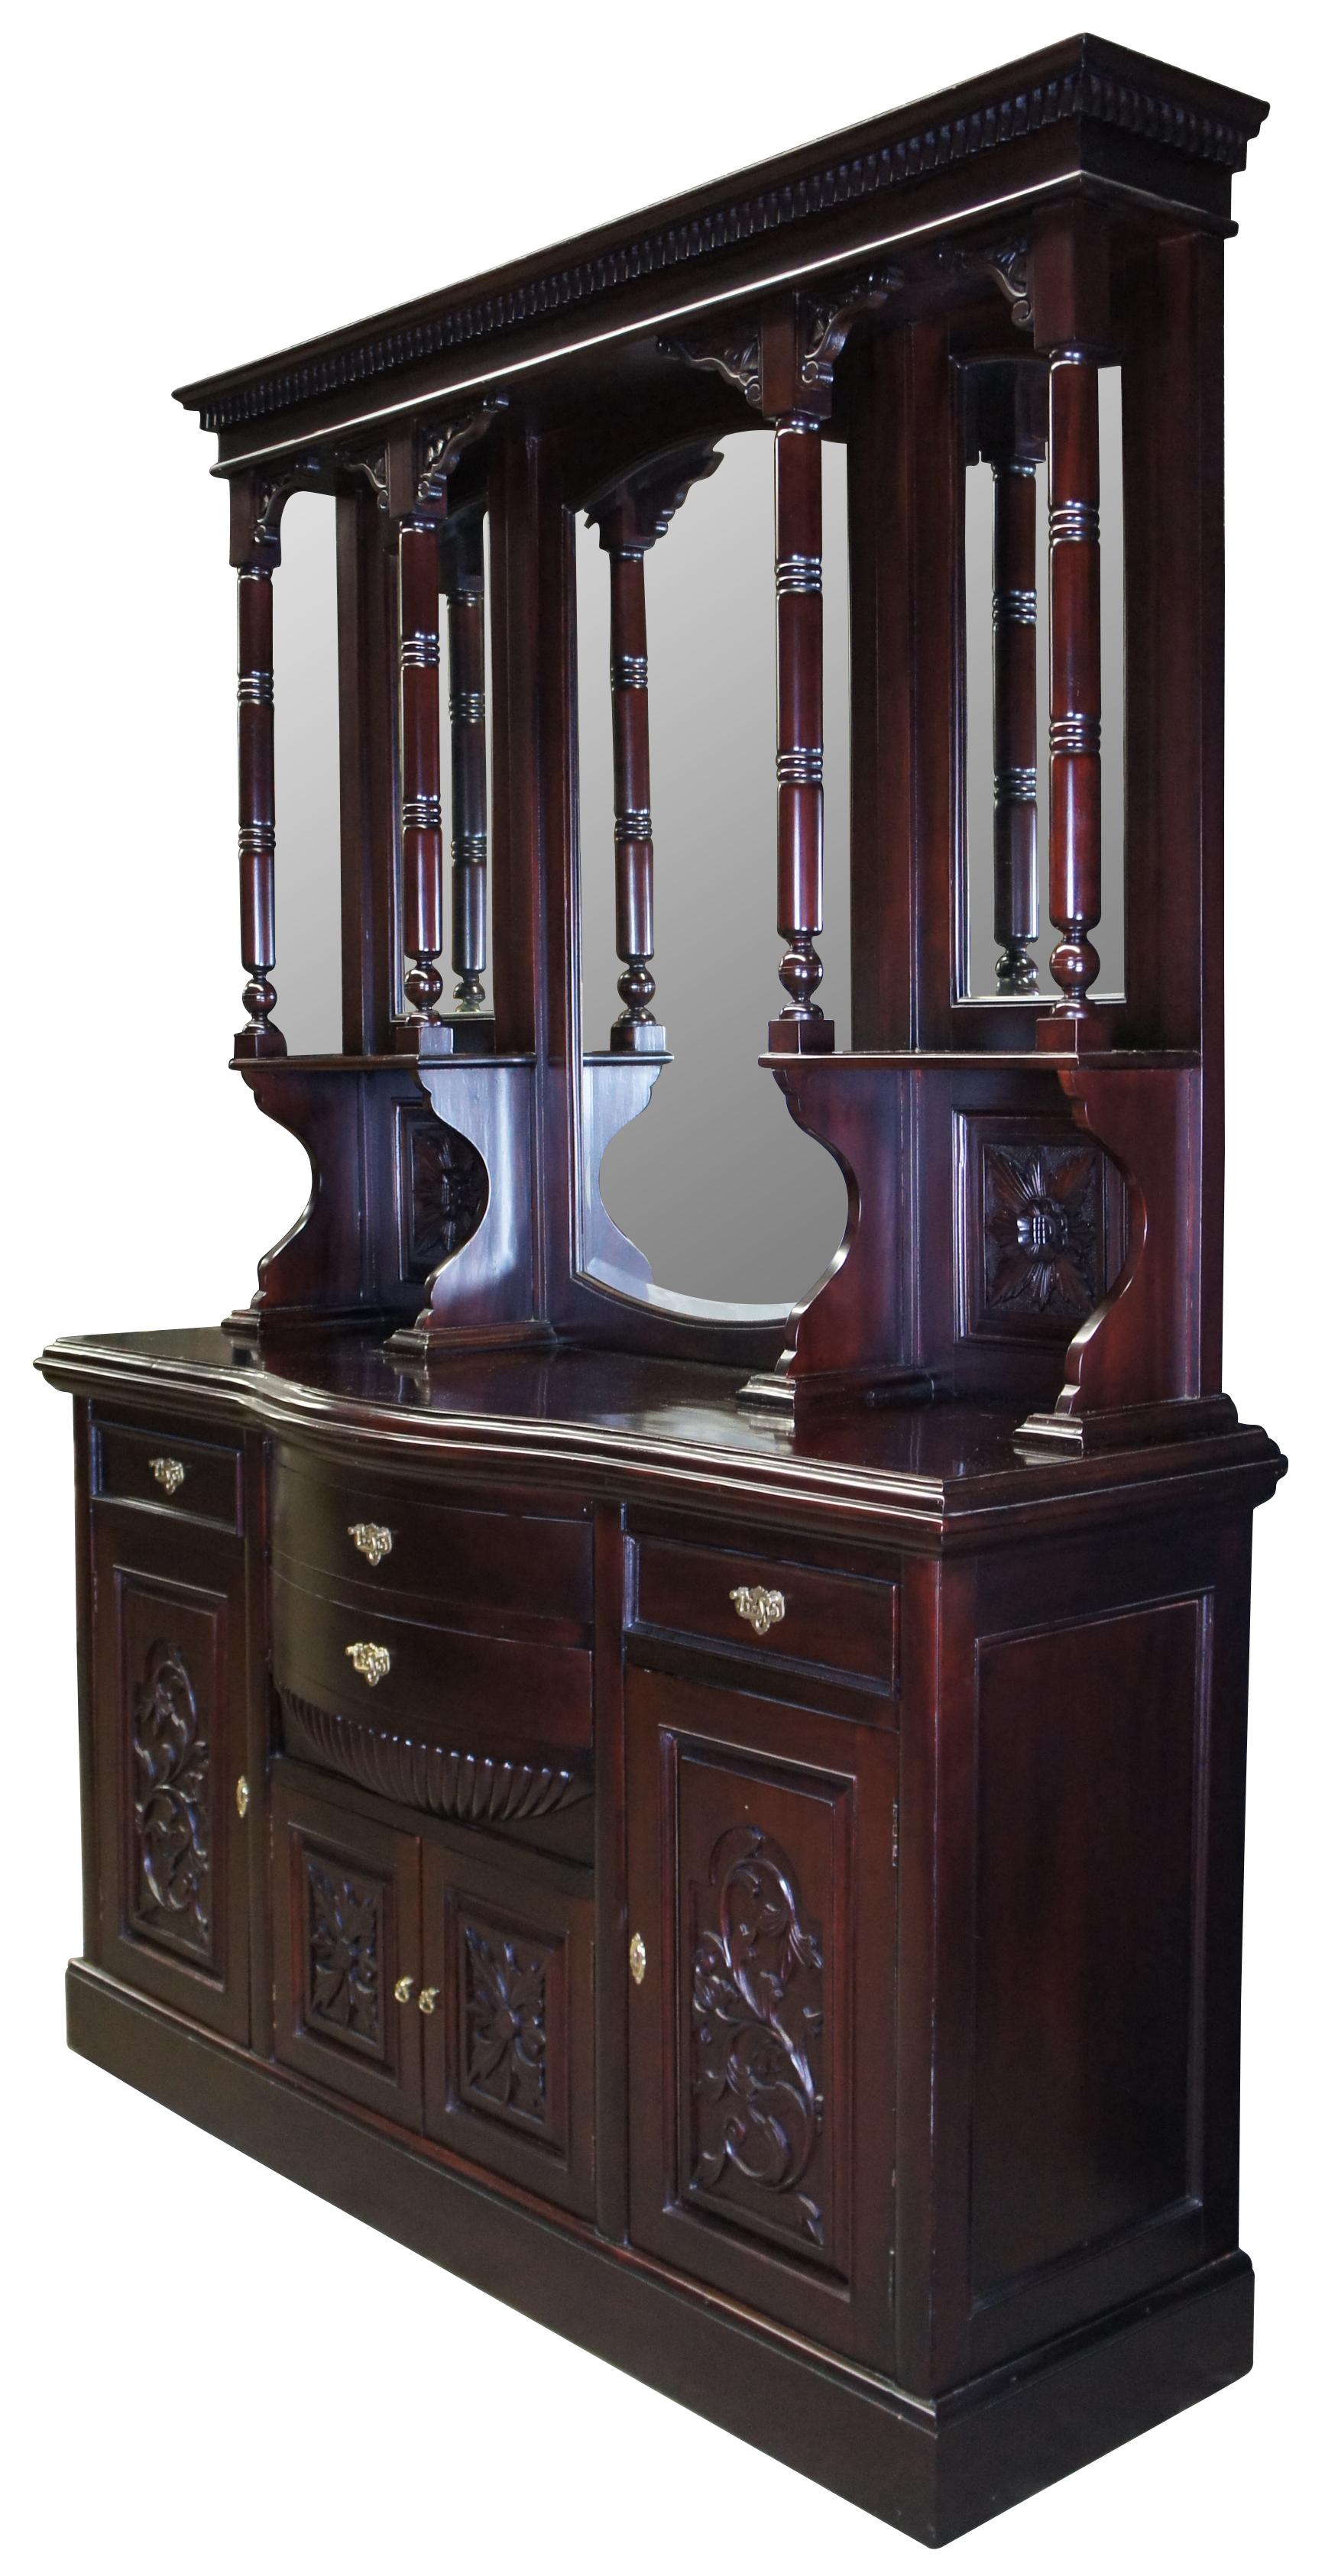 Victorian Revival Buffet and Hutch, circa 1980s. Made from mahogany with a bowfront, 4 dovetailed drawers and lower cabinets for storage. Hutch features beveled mirrors and four full columns with ribbed accents leading to shelves. Includes foliate